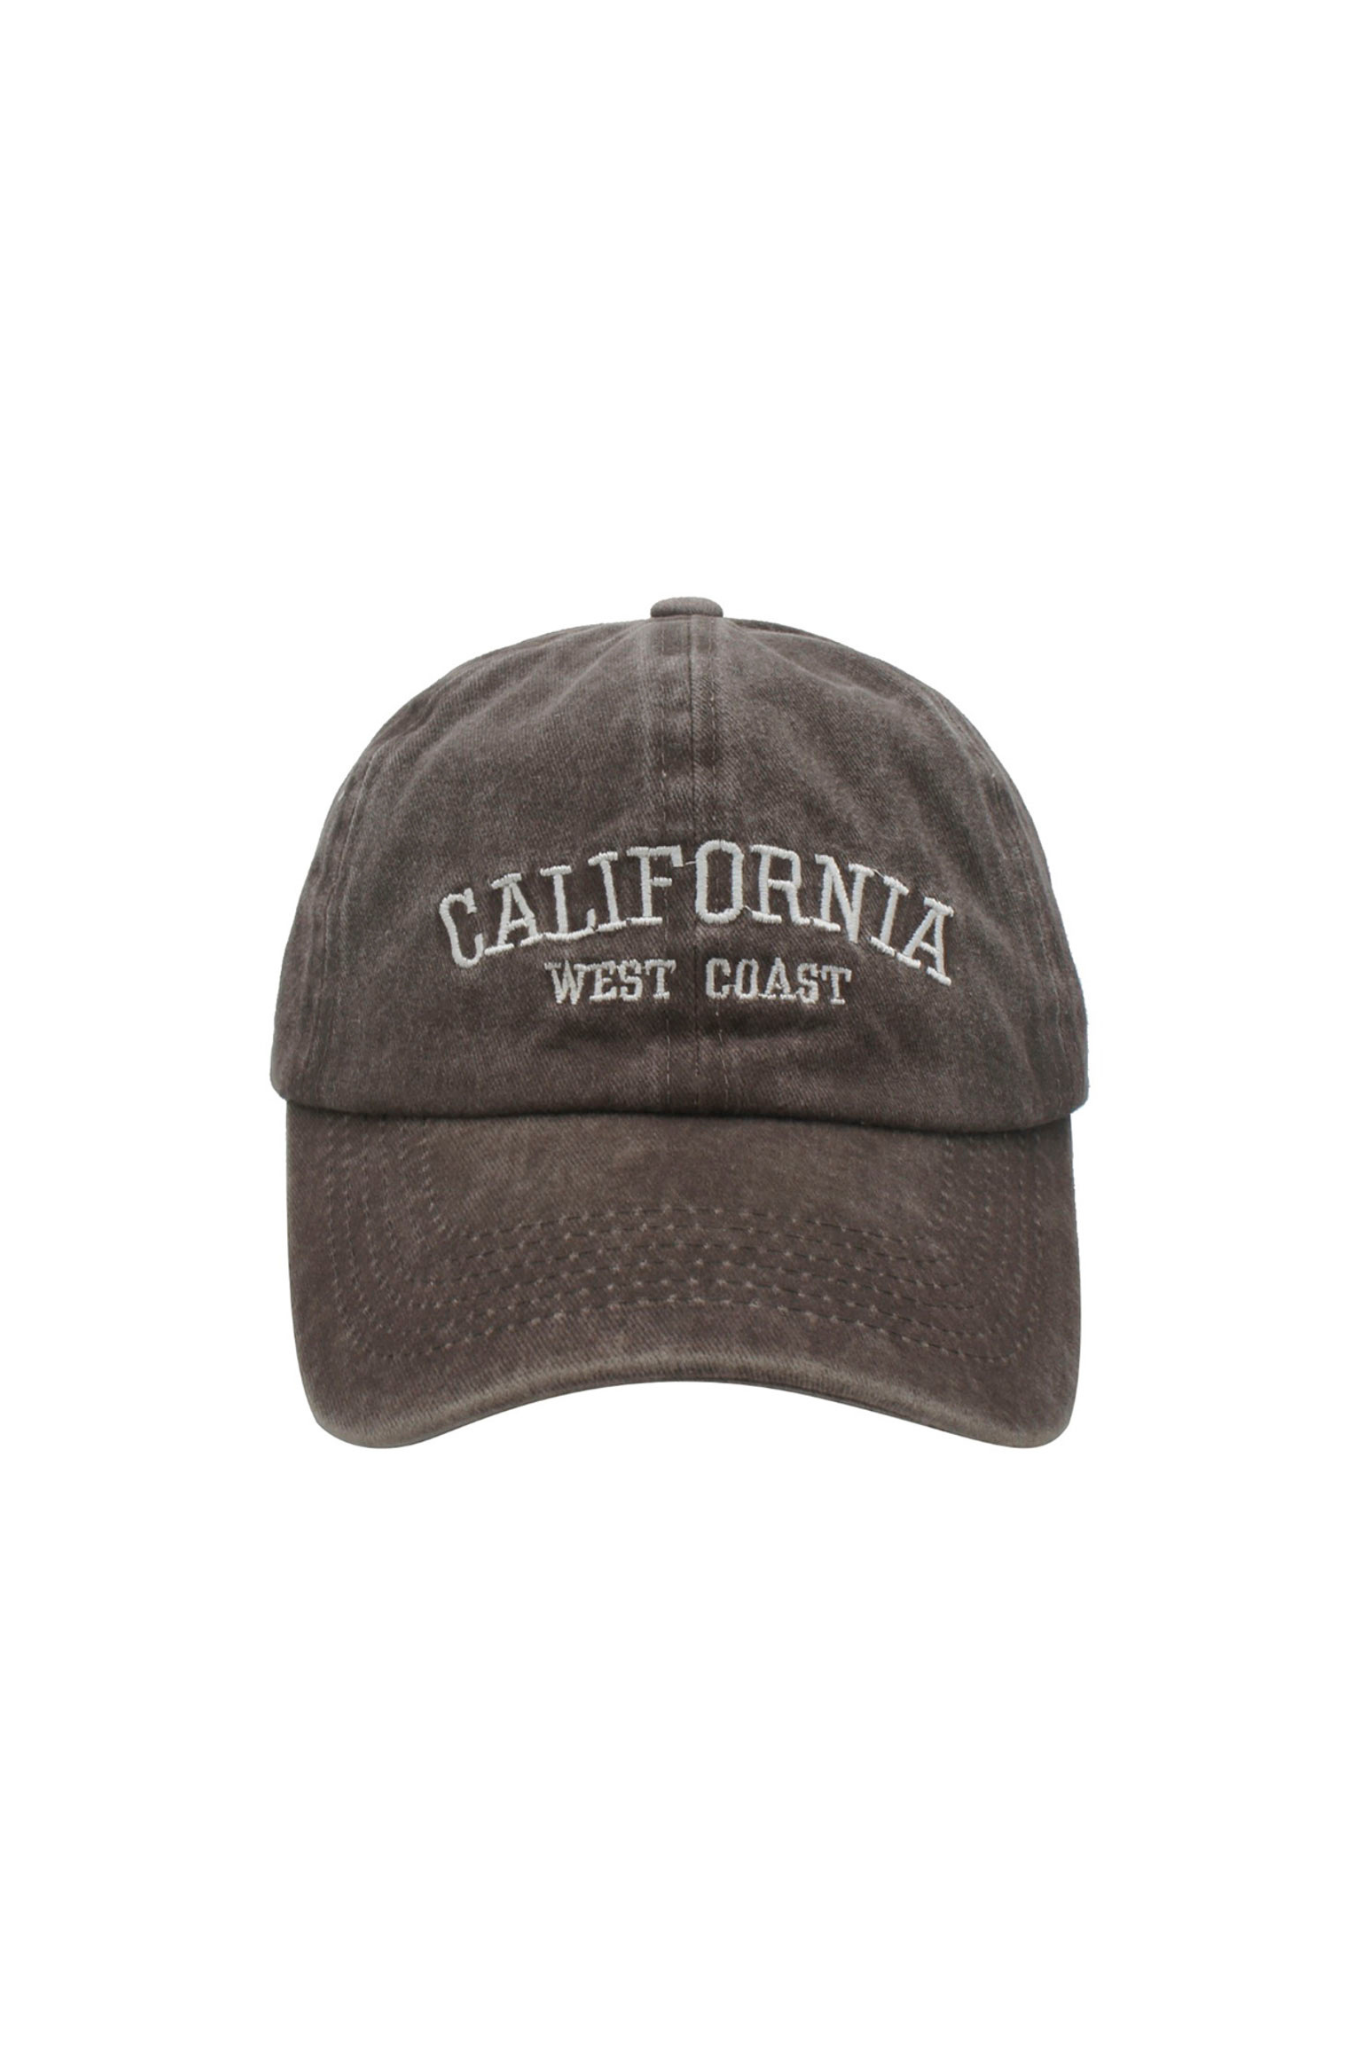 California West Coast Washed Cap in Brown